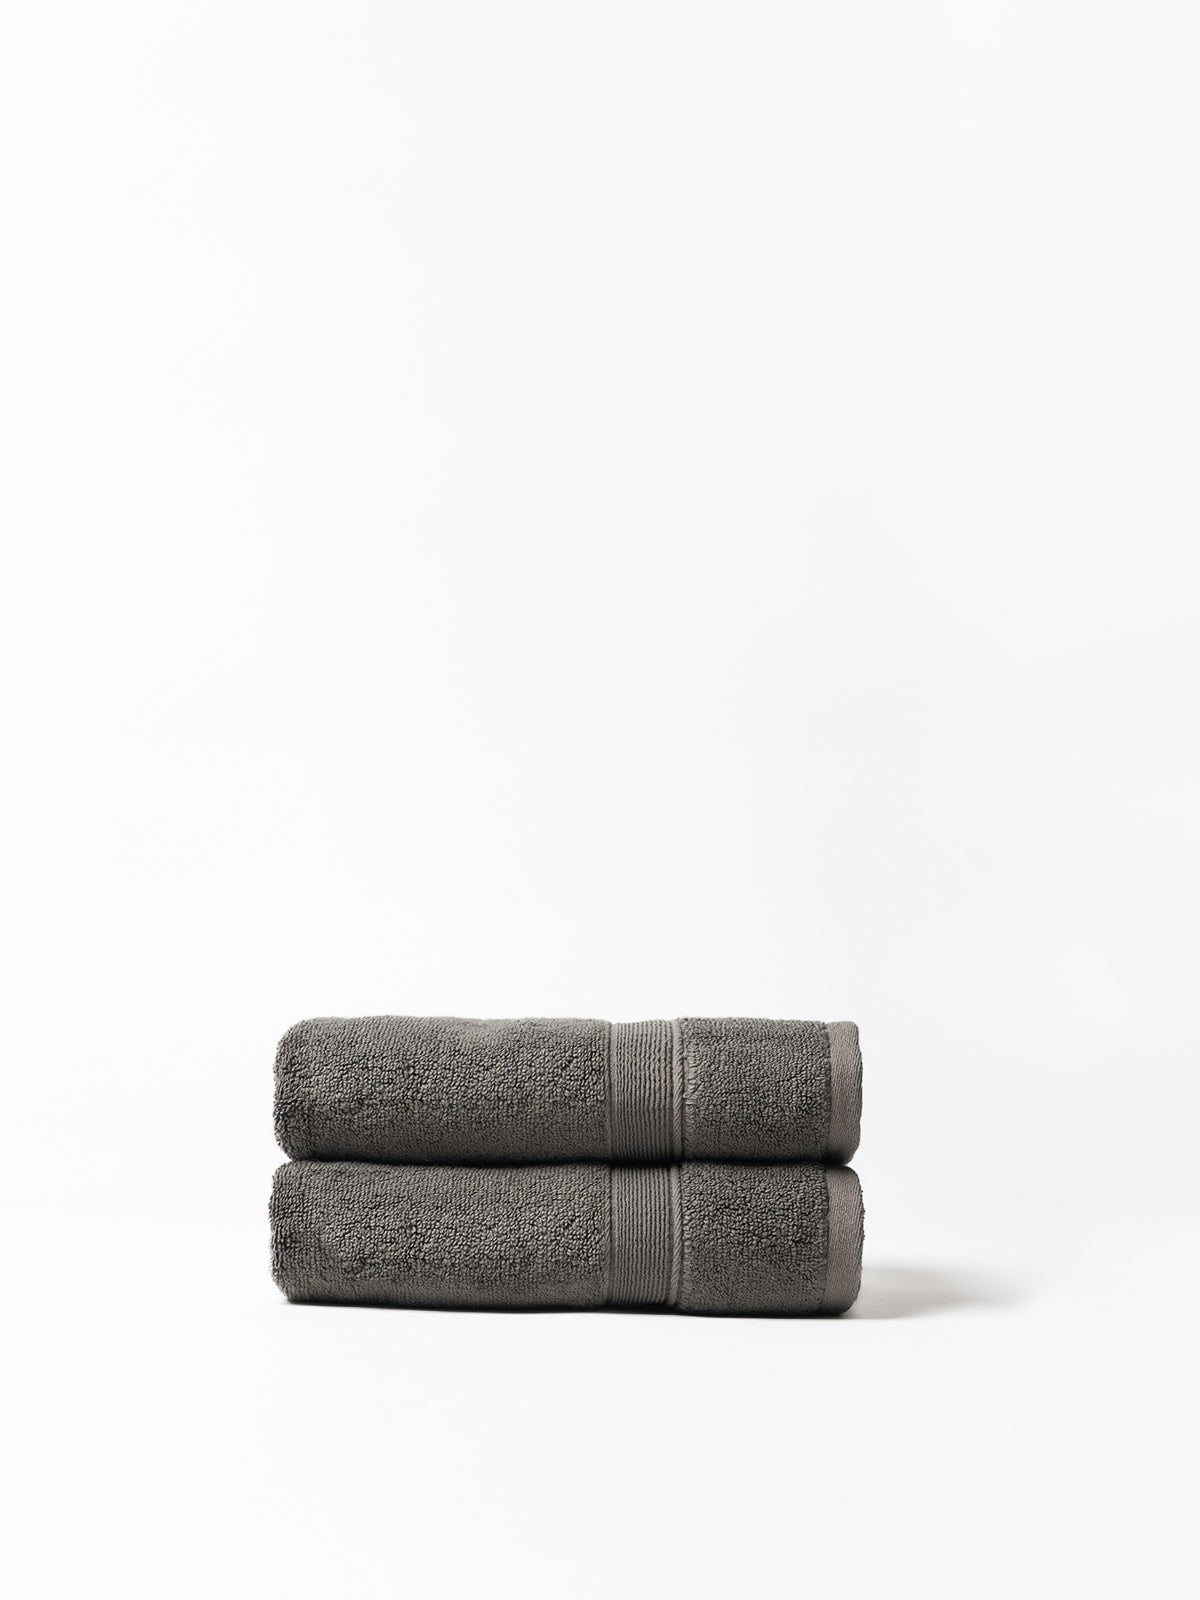 Charcoal luxe bath towels folded with white background 